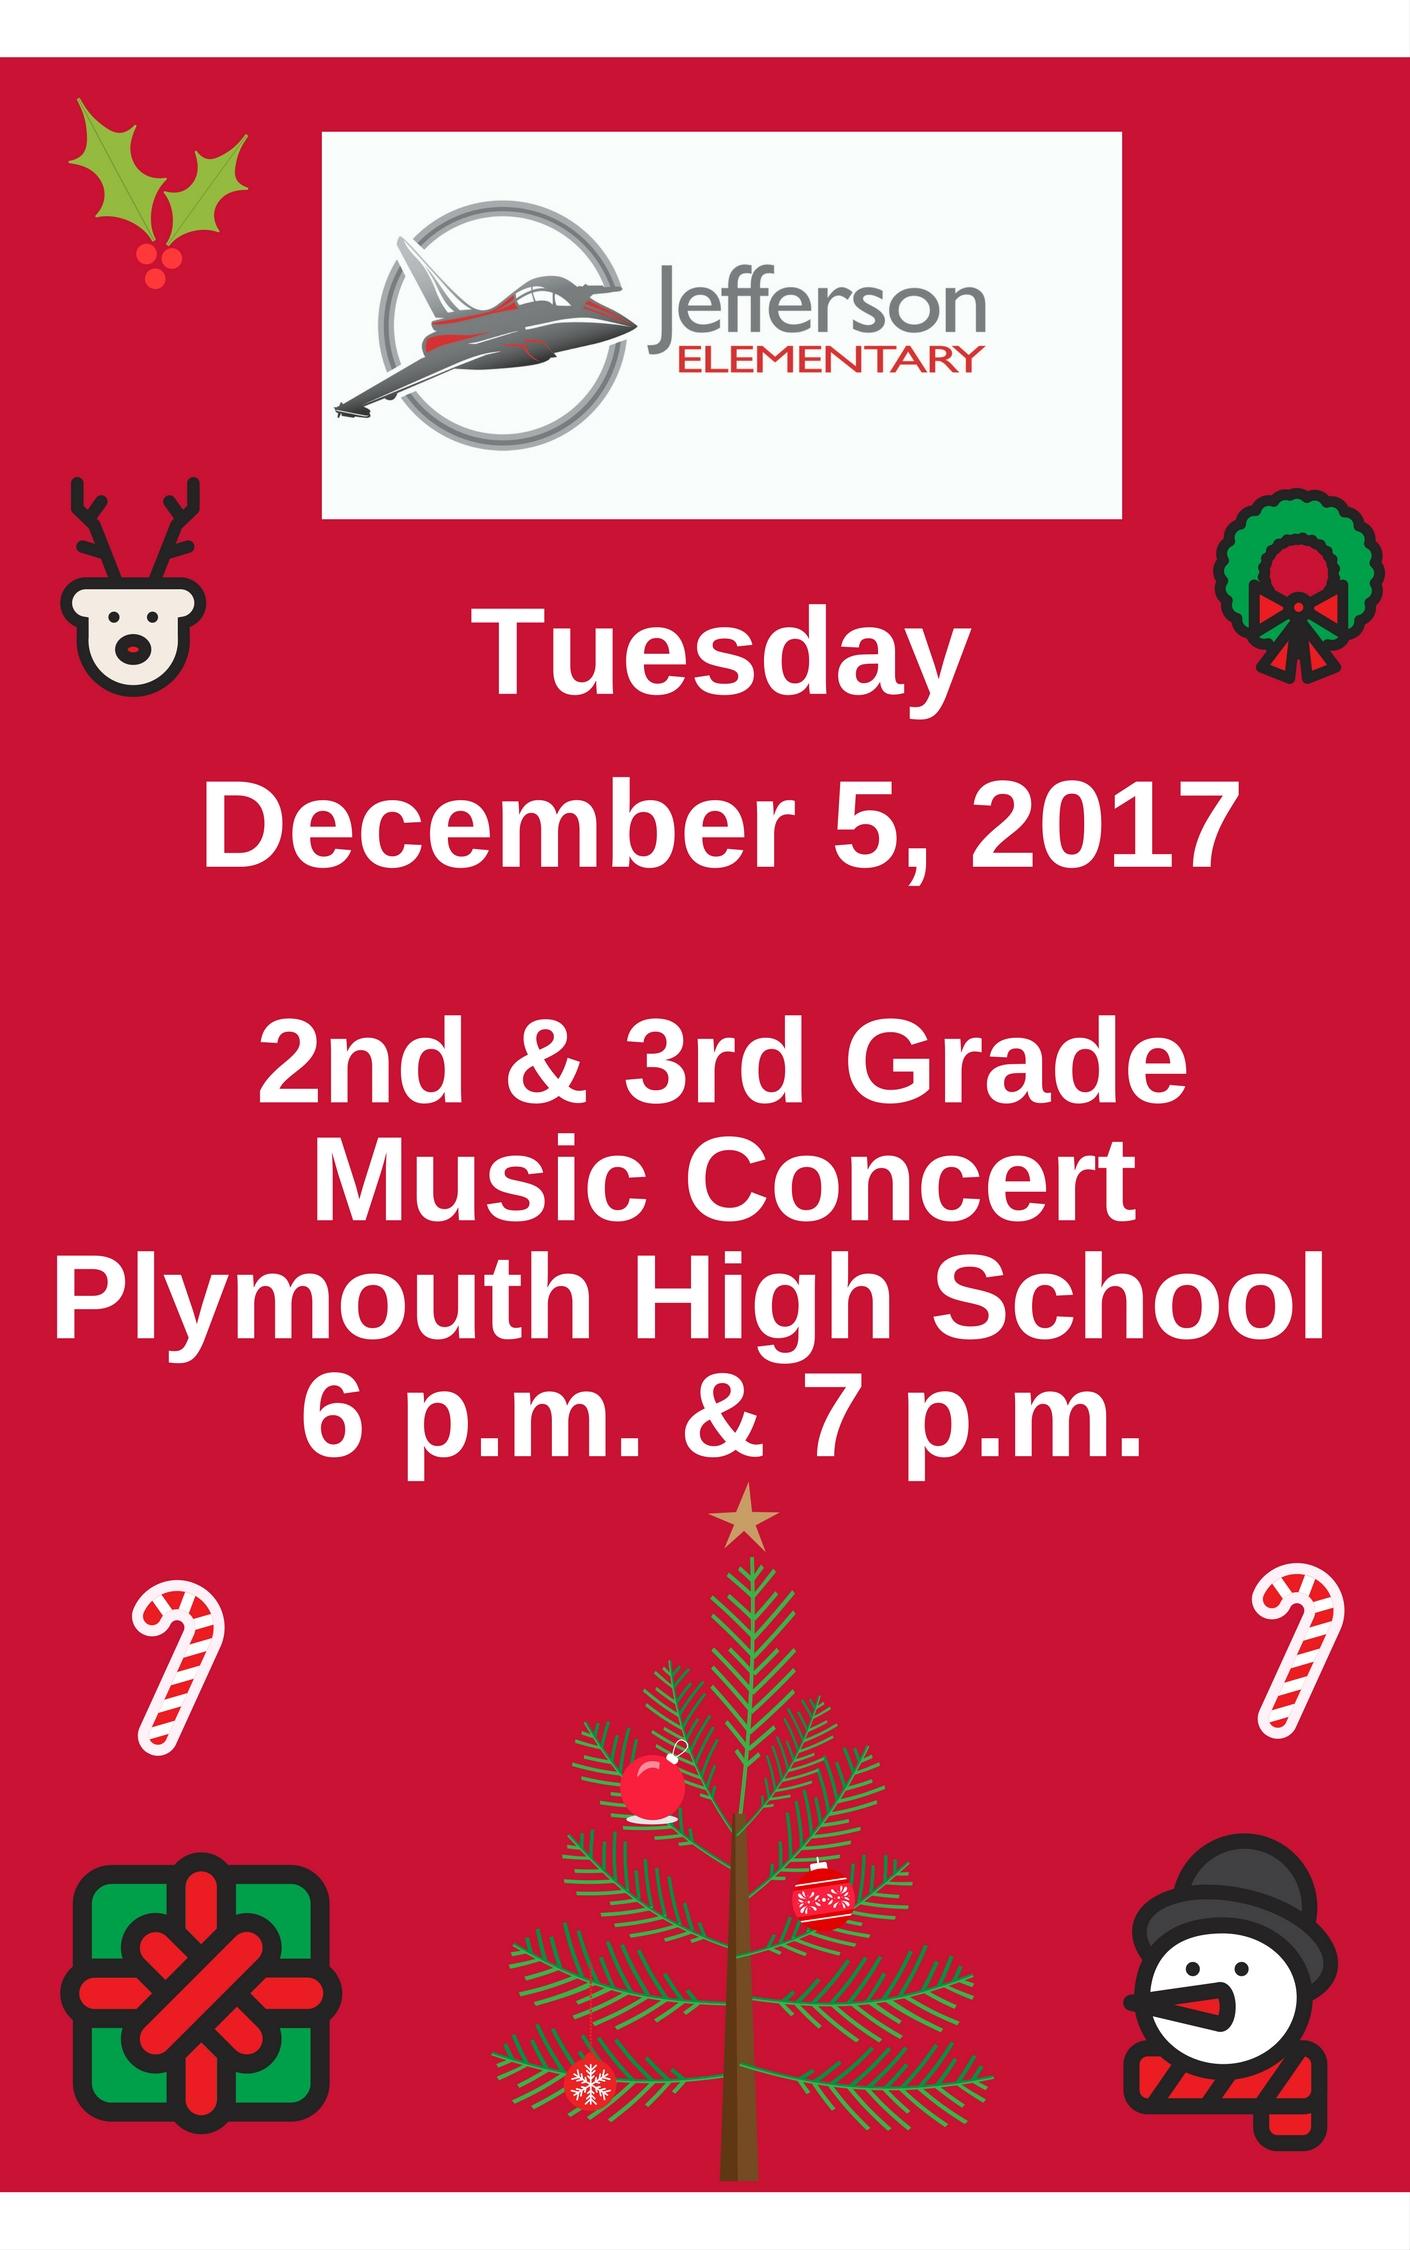 Jefferson Holiday Music Concert on December 5, 2017